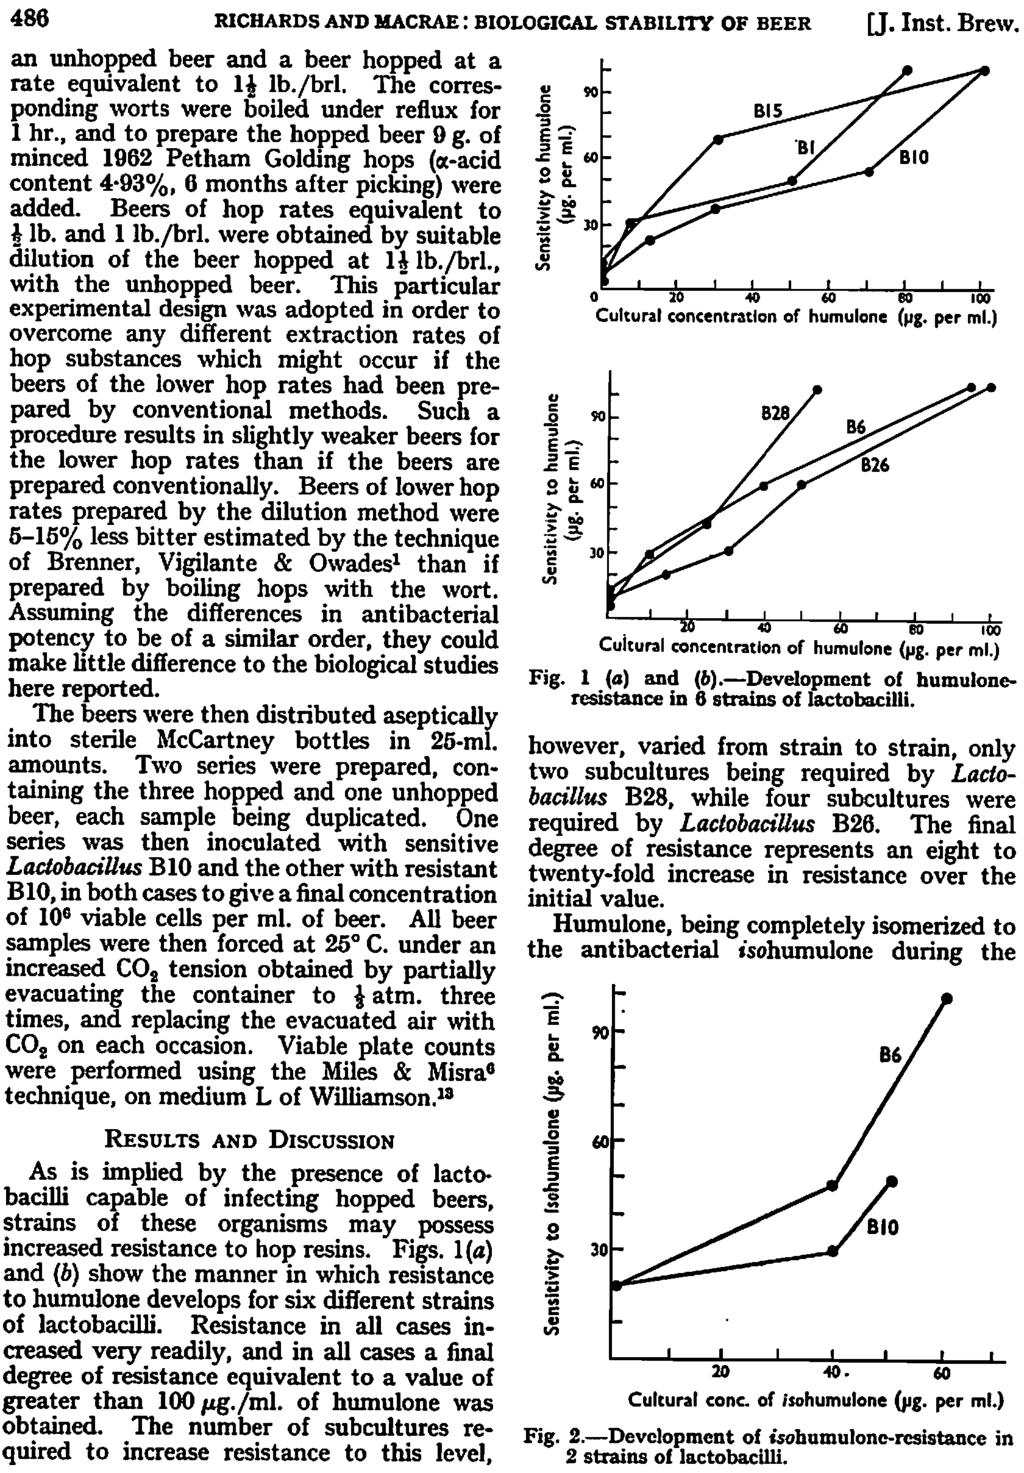 486 RICHARDS AND MACRAE: LOGICAL STABILITY OF BEER [J. Inst. Brew. an unhopped beer and a beer hopped at a rate equivalent to 1$ lb./brl. The corres ponding worts were boiled under reflux for 1 hr.